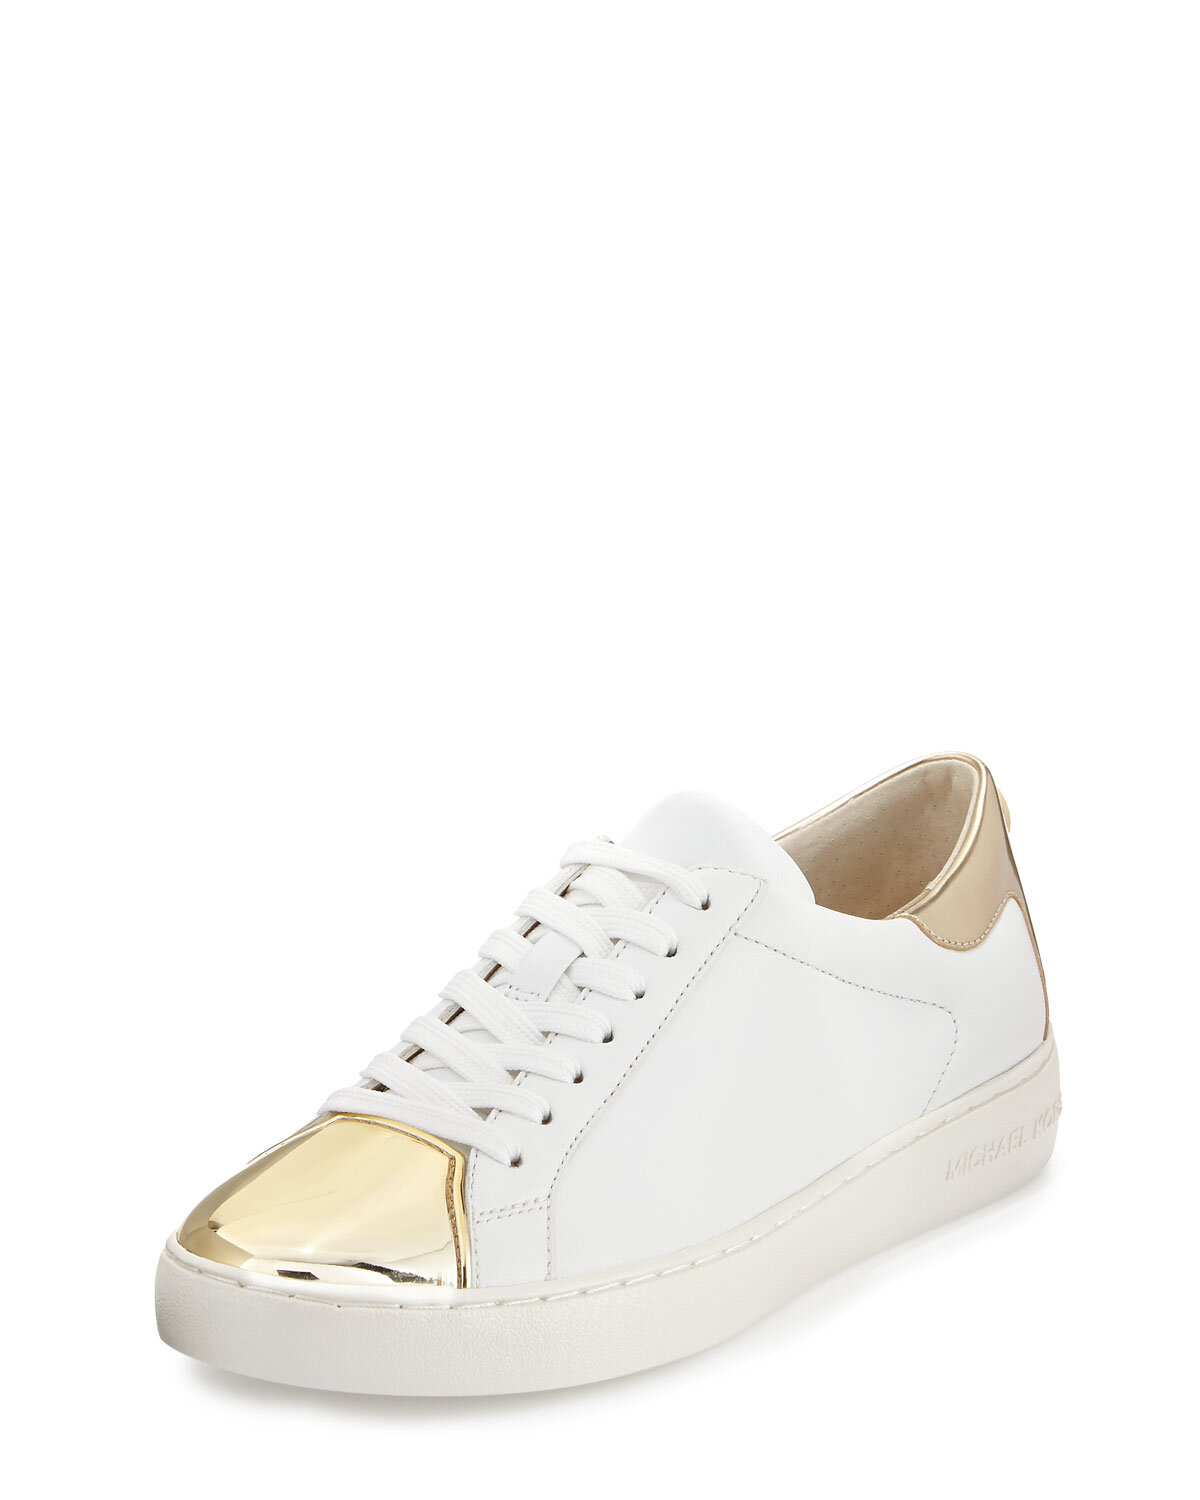 Michael Michael Kors Frankie Sneakers in White with Pale Gold Trim.jpg